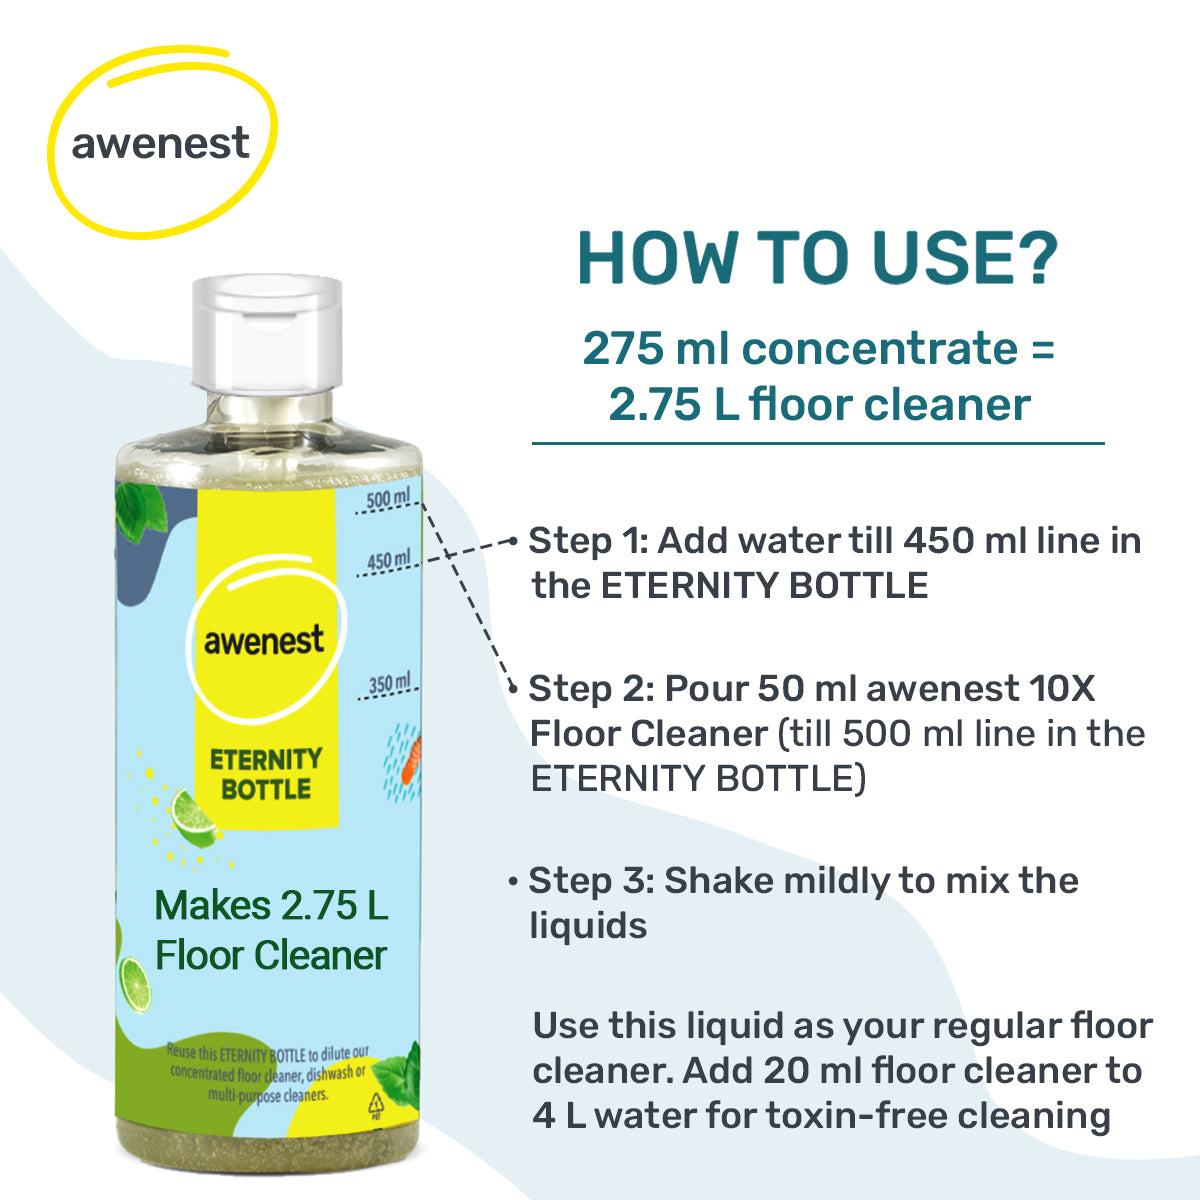 awenest pet-friendly, child-safe powder to liquid disinfectant floor cleaner